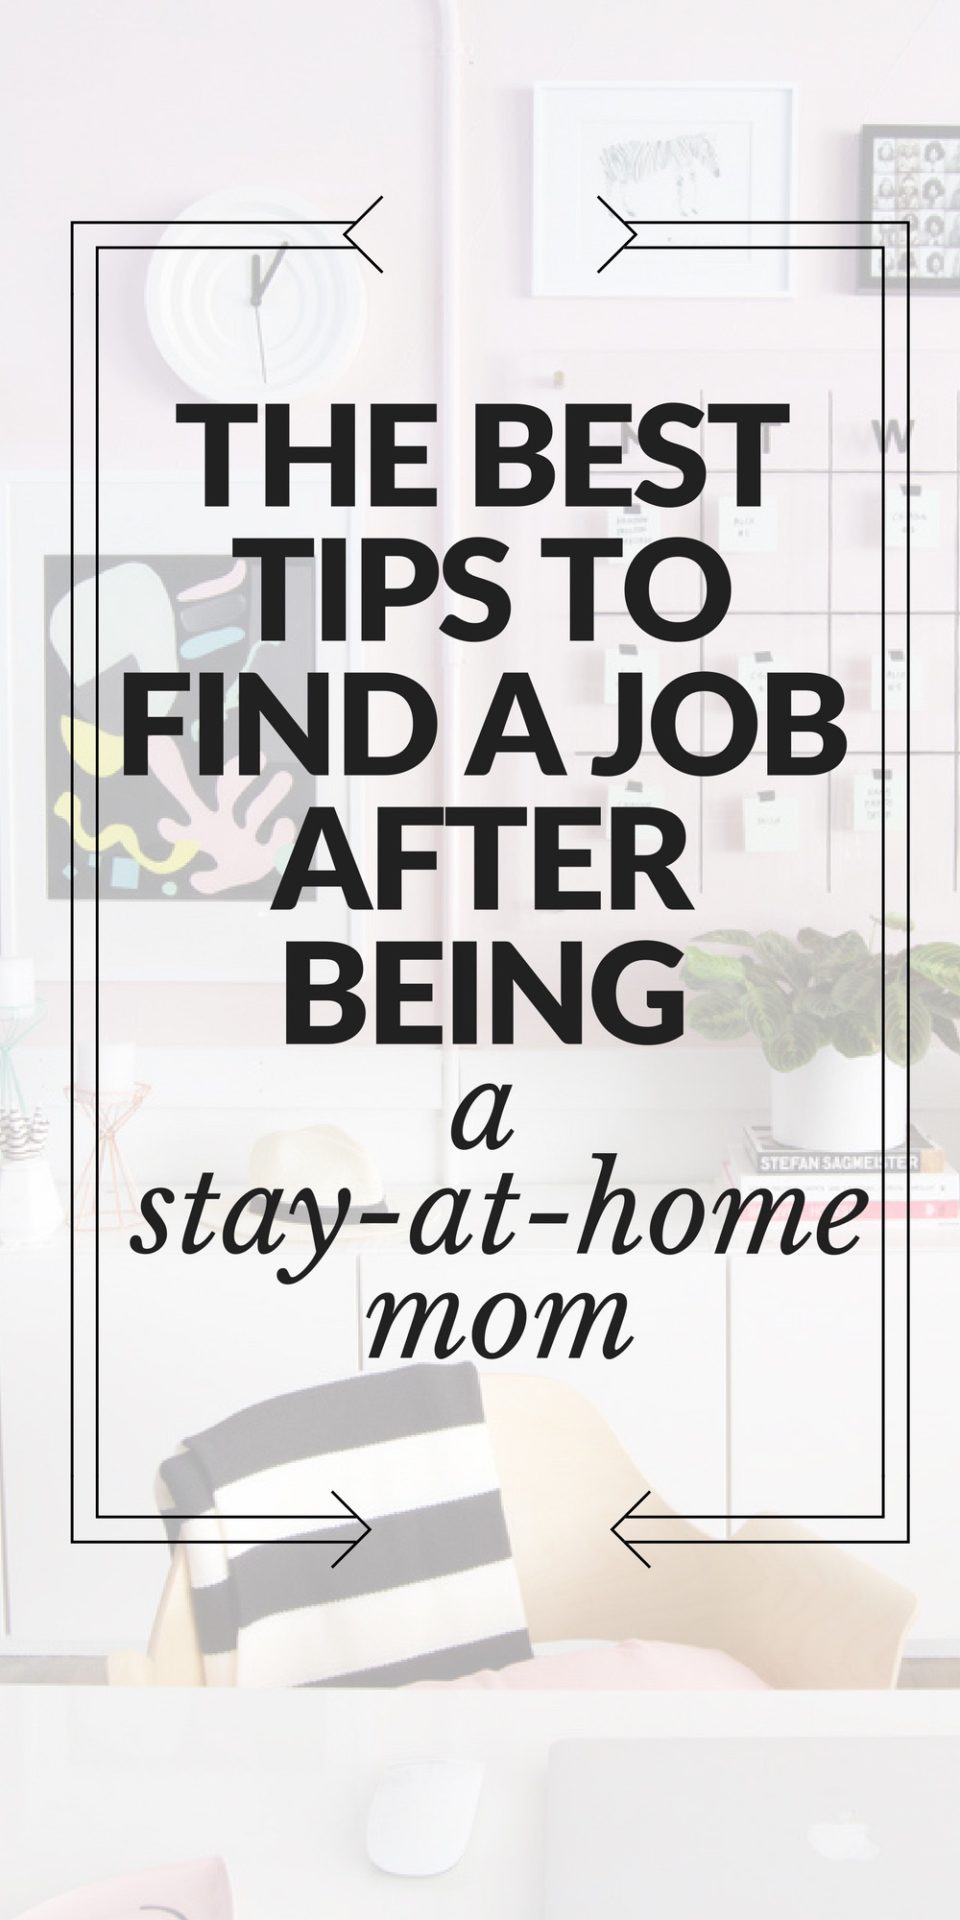 Best Tips to find a job after being a stay at home mom // the modern savvy, a life & style site